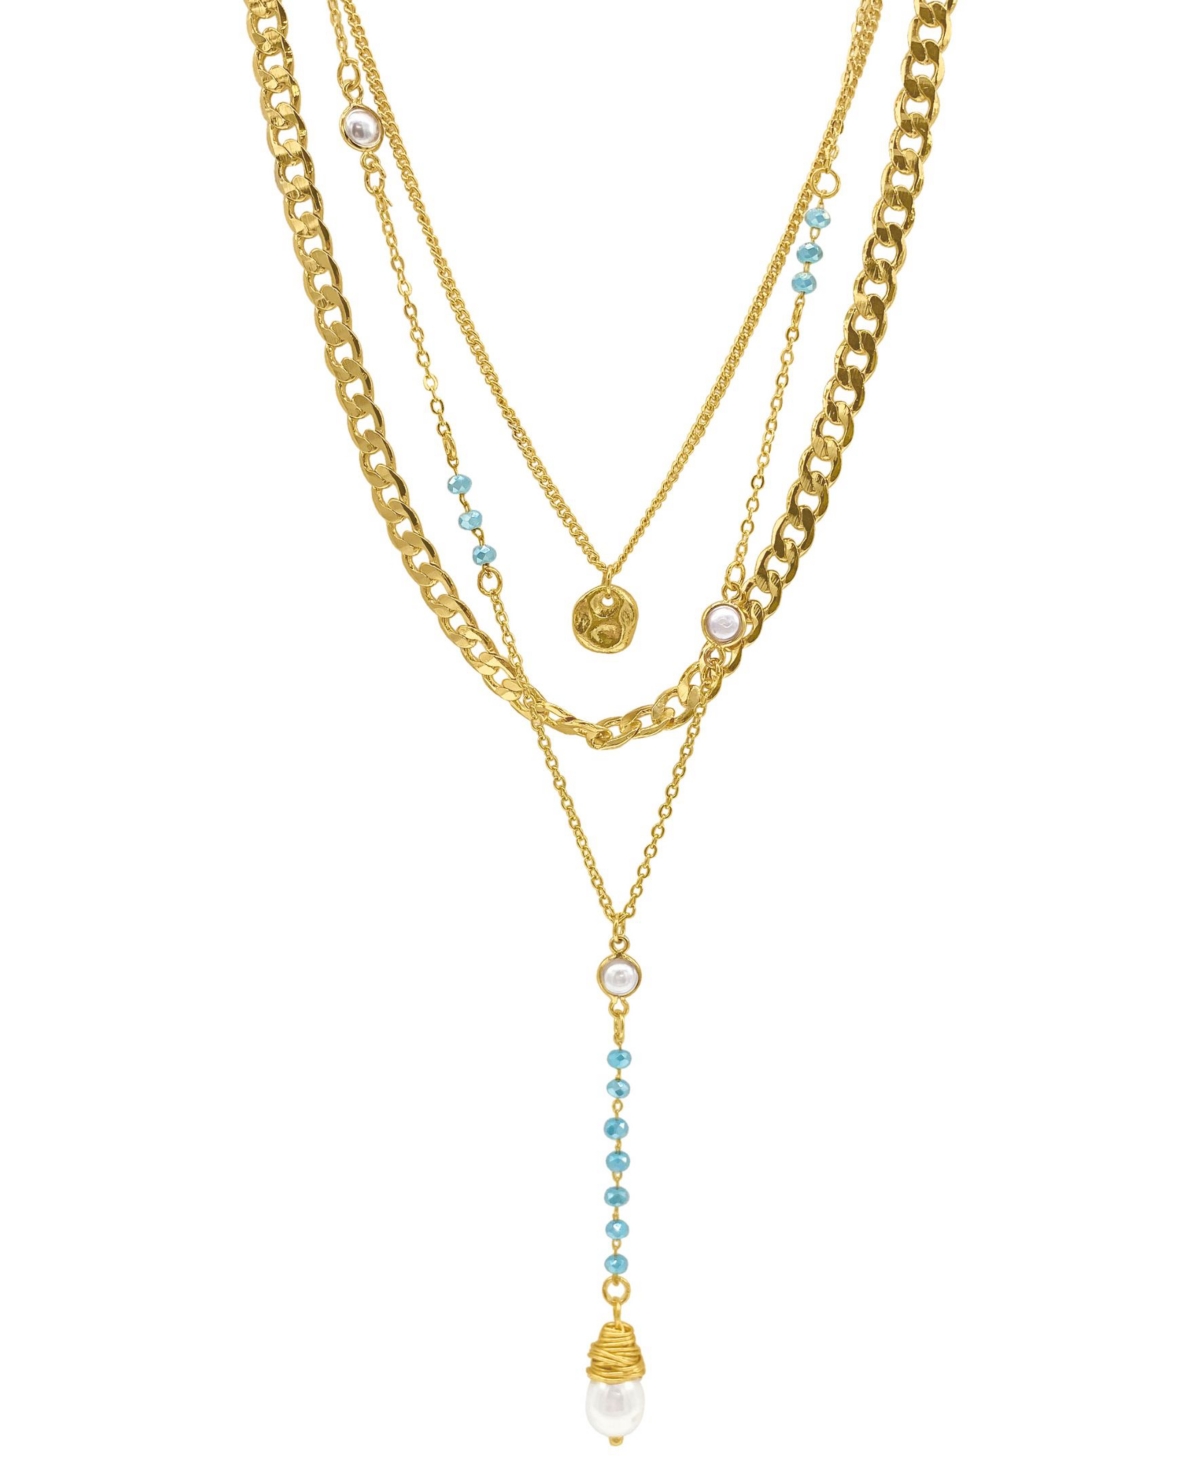 Shop Adornia 17-19" Adjustable 14k Gold Plated Turquoise Beaded Layered Freshwater Pearl Necklace